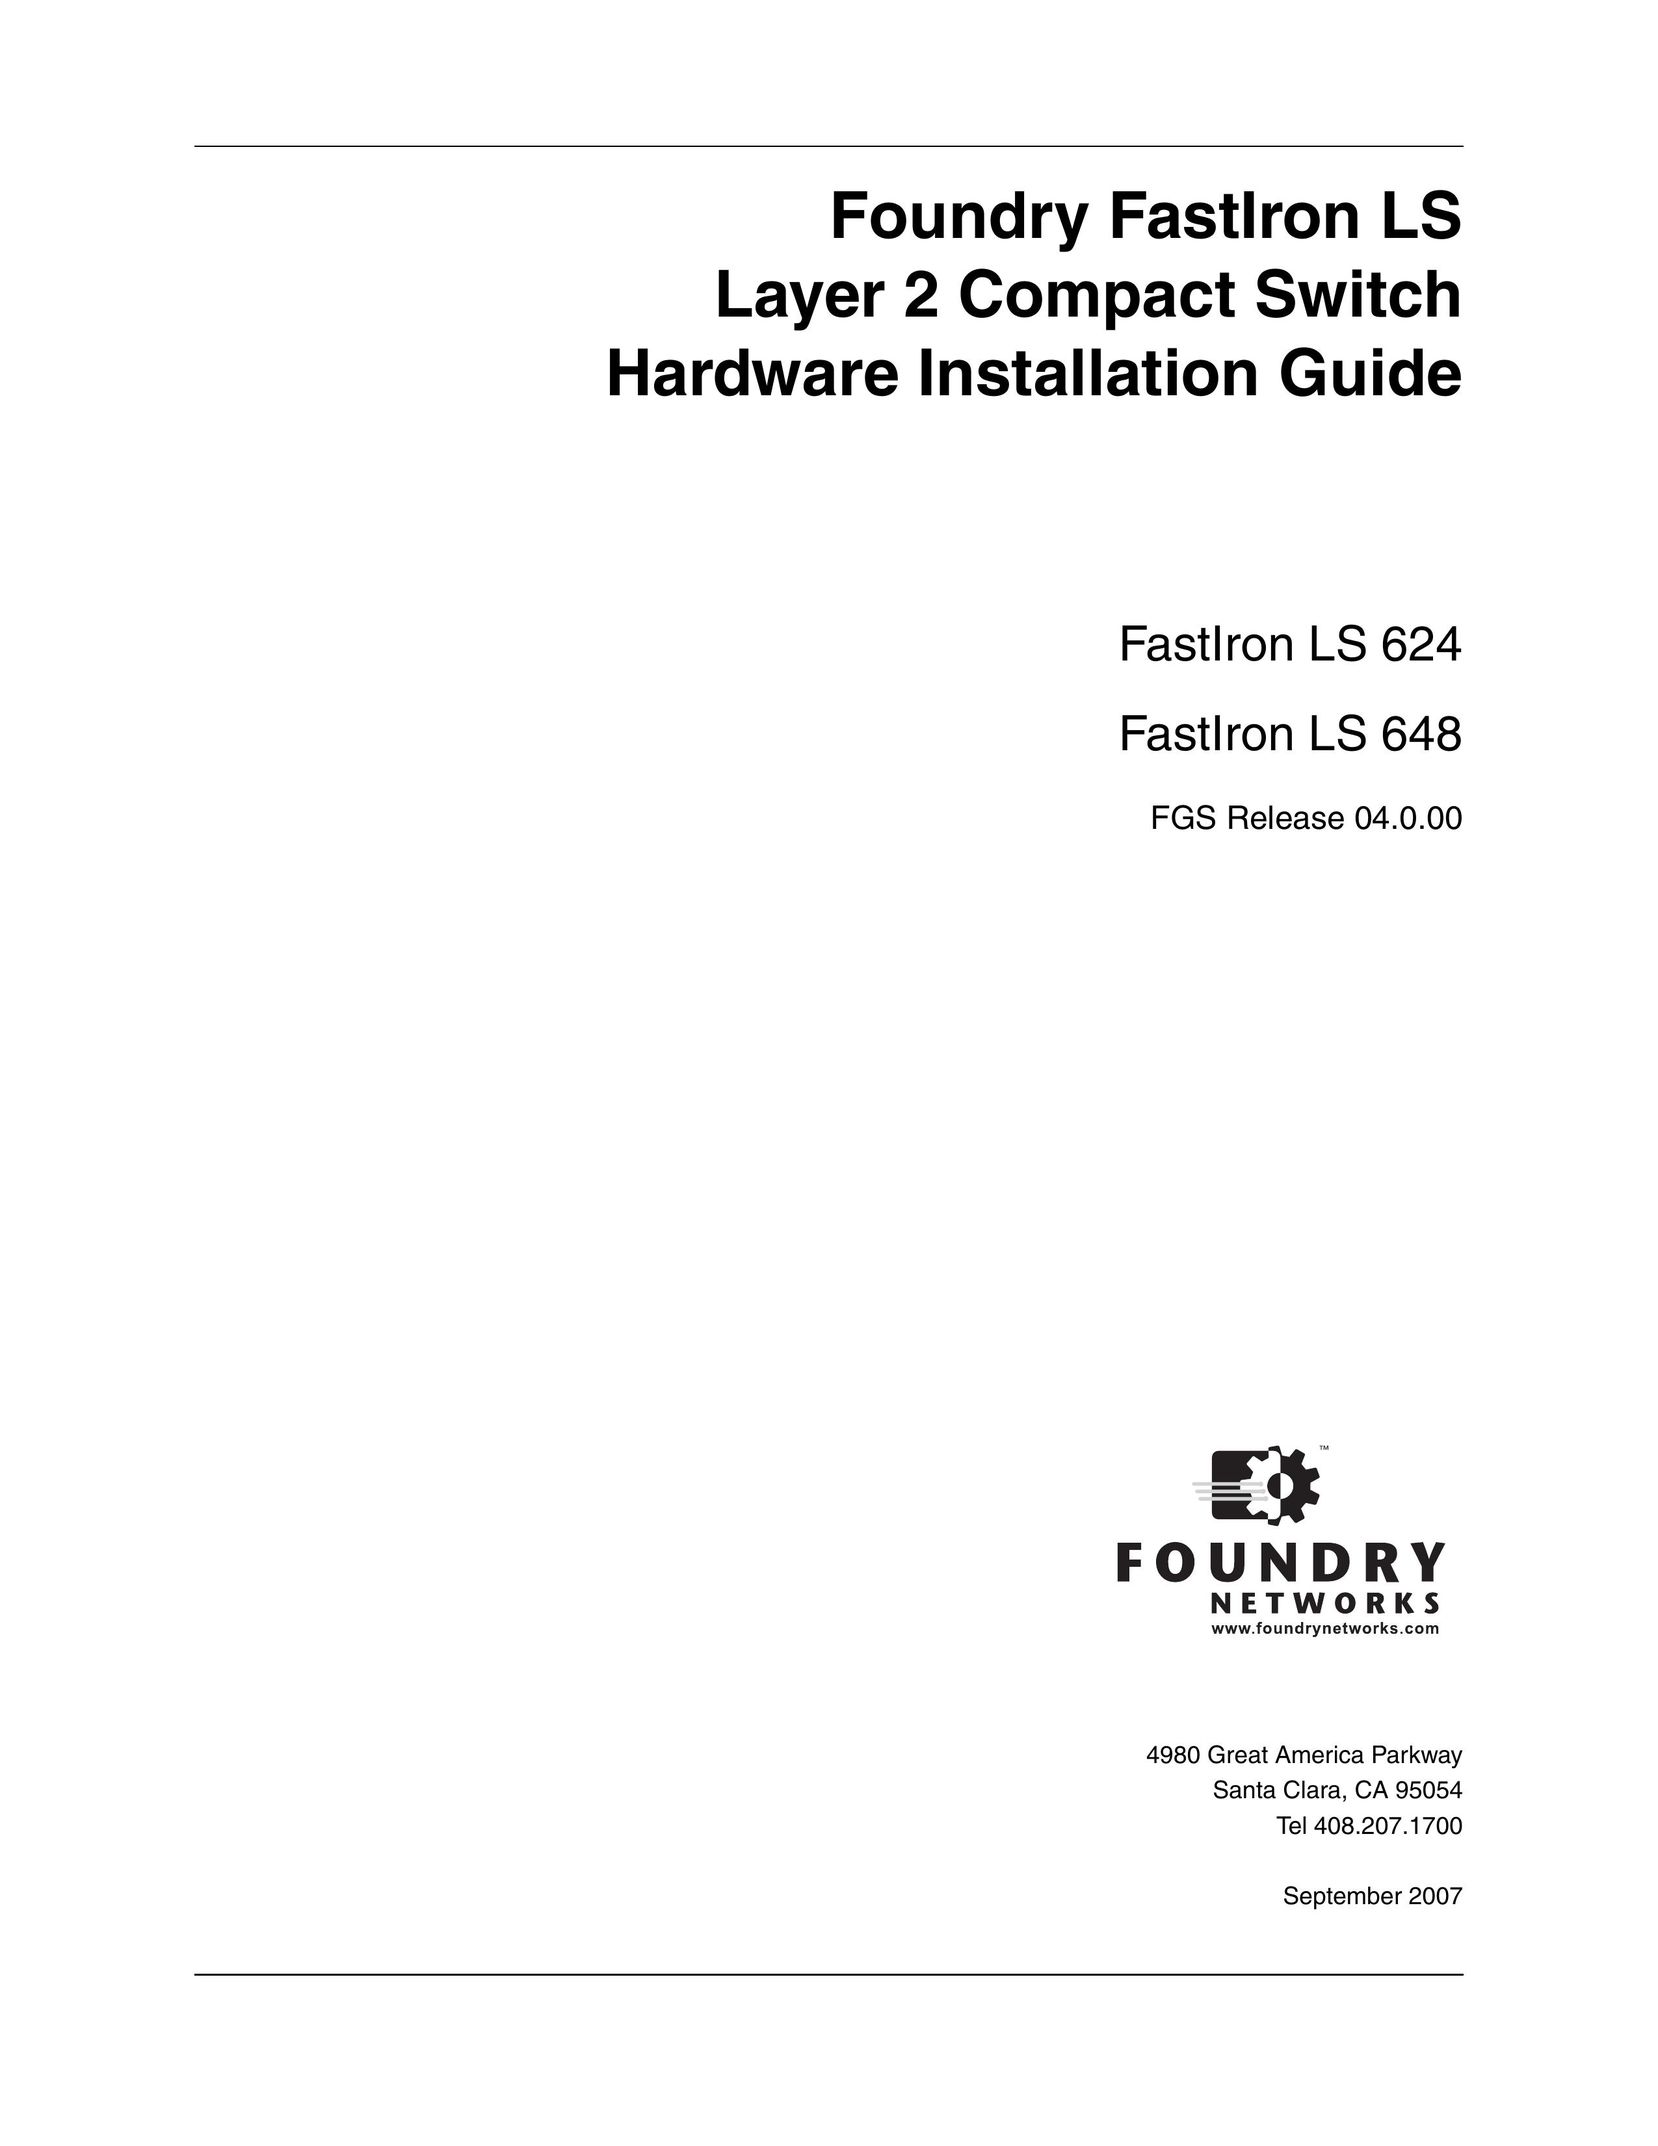 Foundry Networks LS 648 Switch User Manual